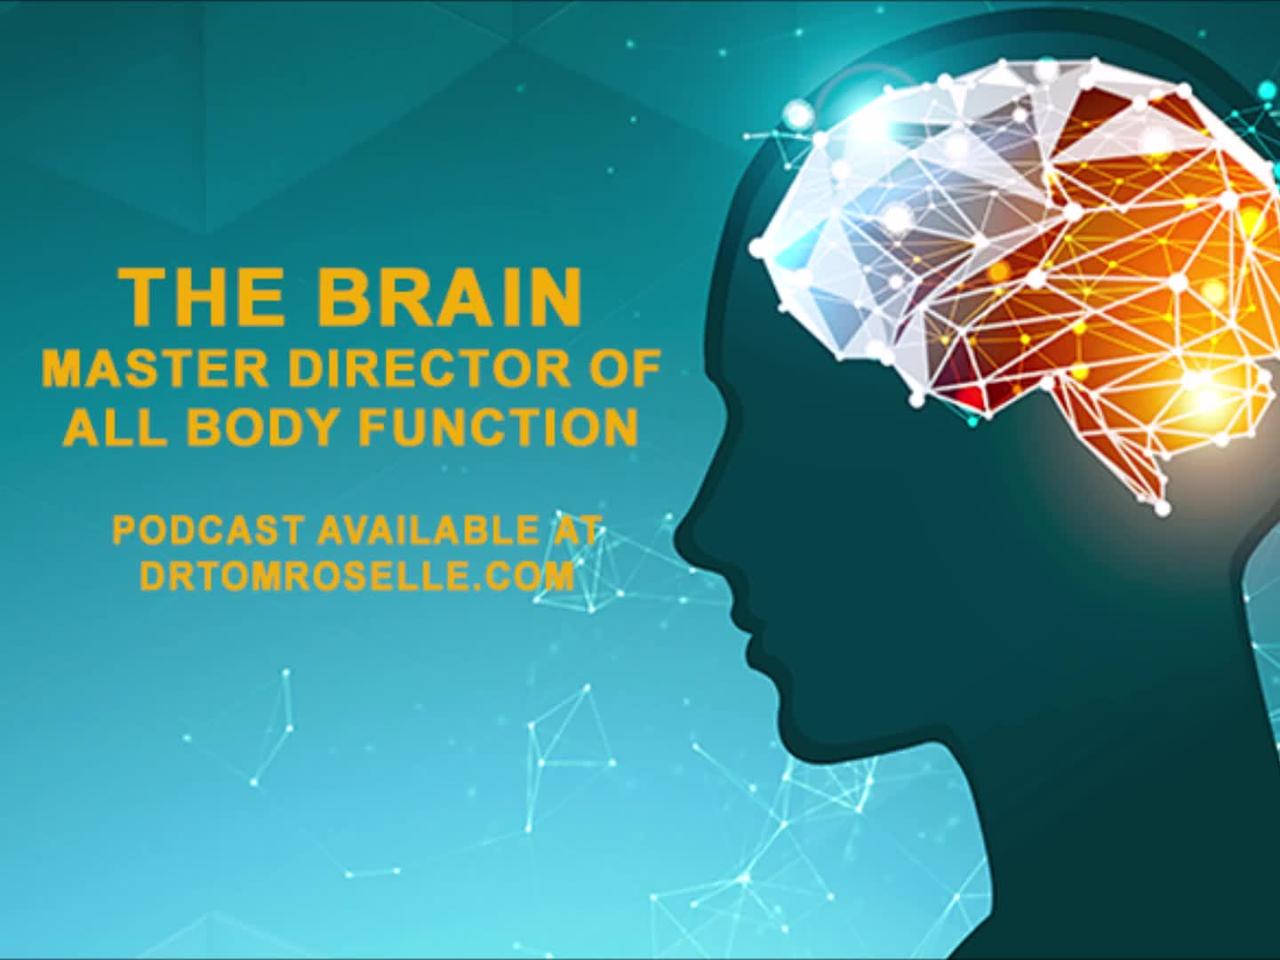 The Brain - The Master Director of All Body Functions